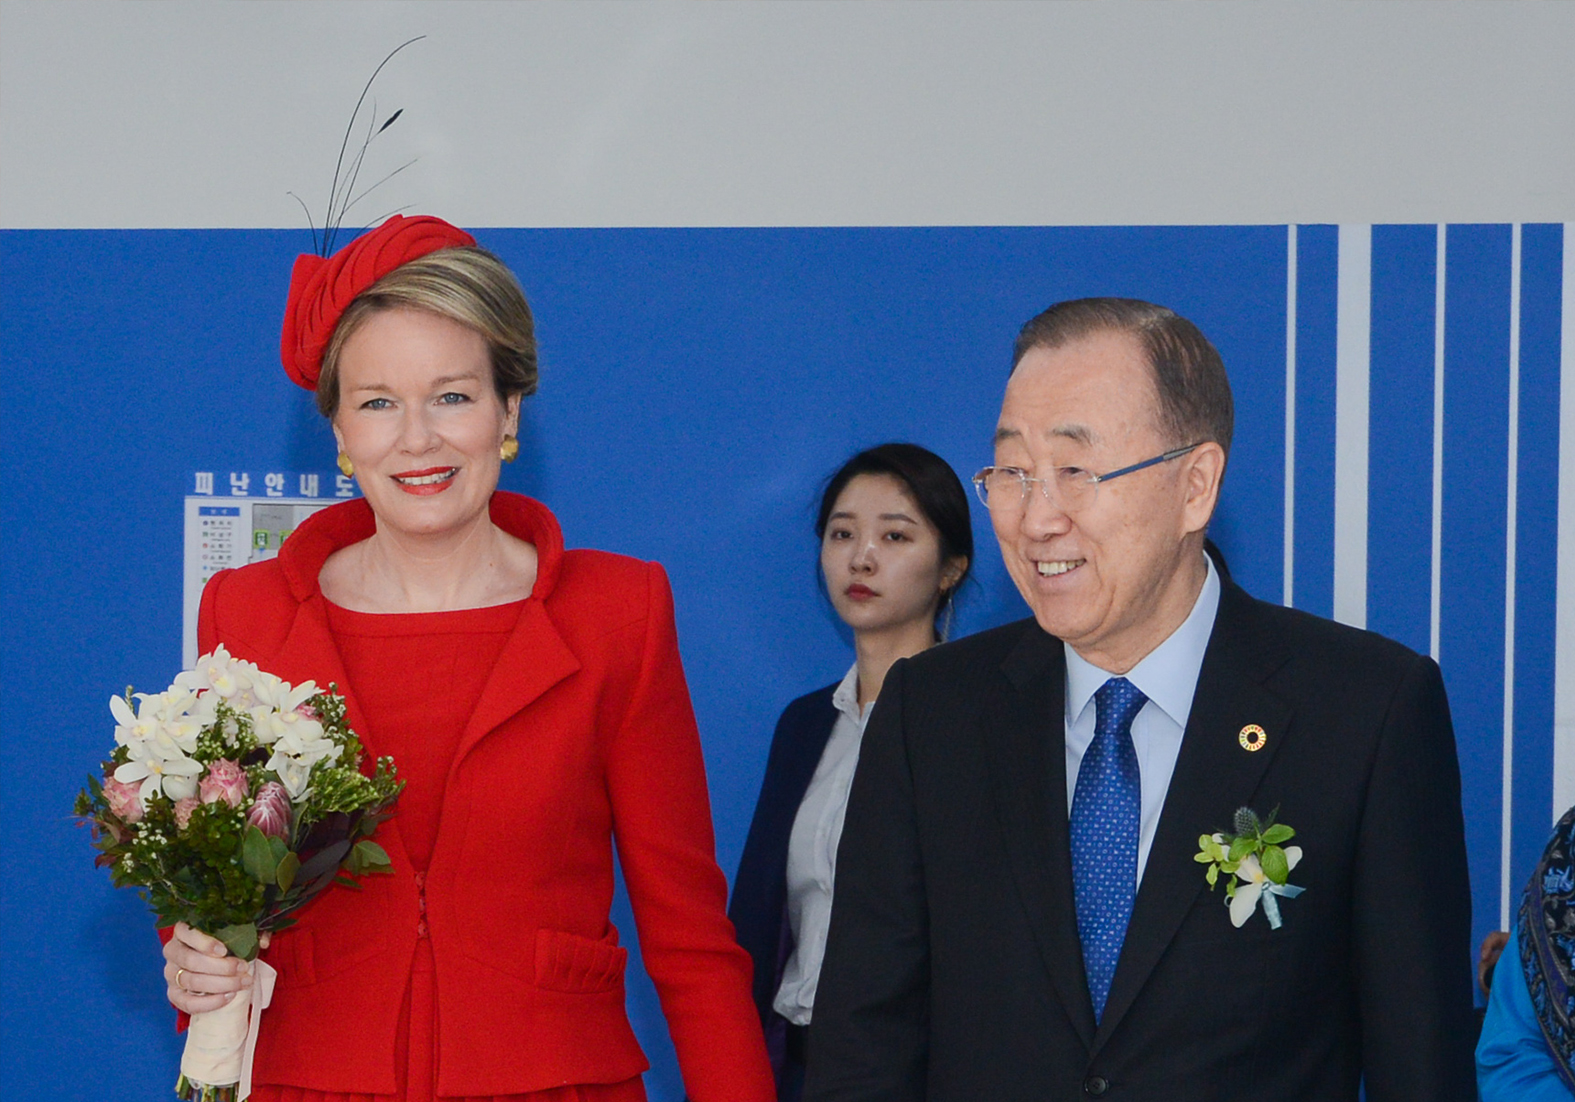 Queen Mathilde wore a red bibi named Angela in silk crepe pleated with black feathers from the Fabienne Delvigne House in South Korea.